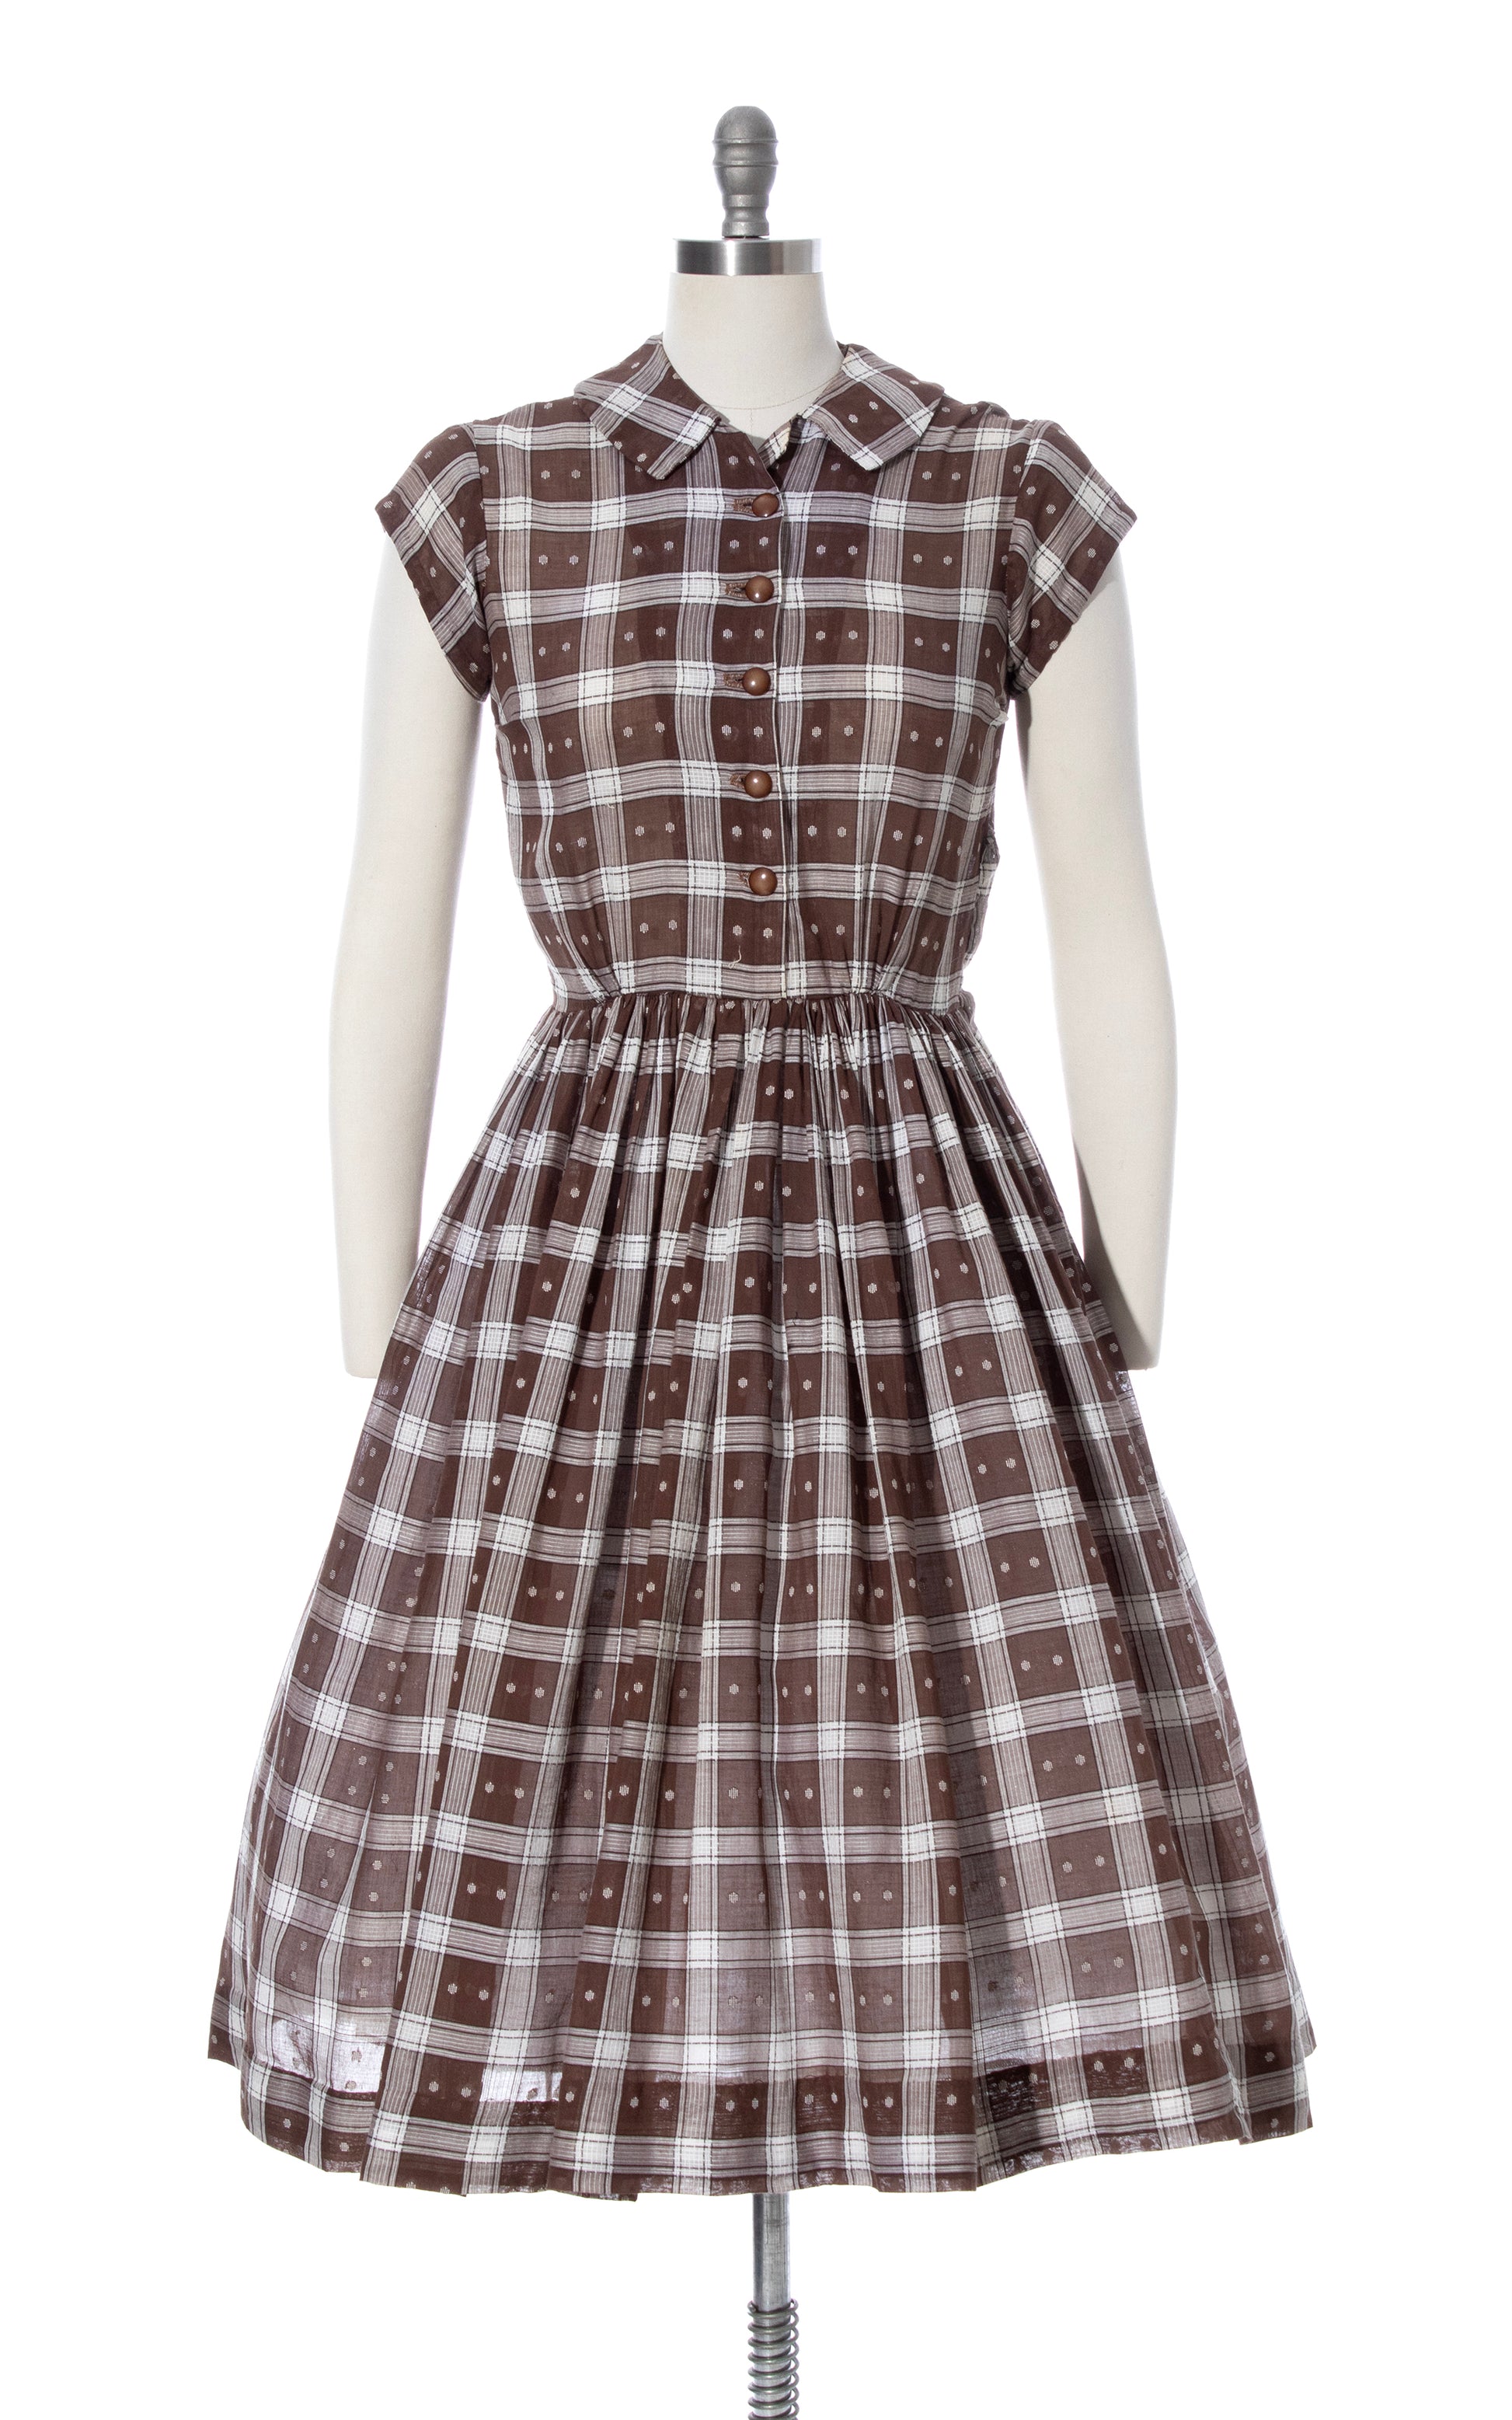 Vintage 50s 1950s Cotton Gingham Plaid Shirtwaist Fit and Flare Day Dress Brown BirthdayLifeVintage